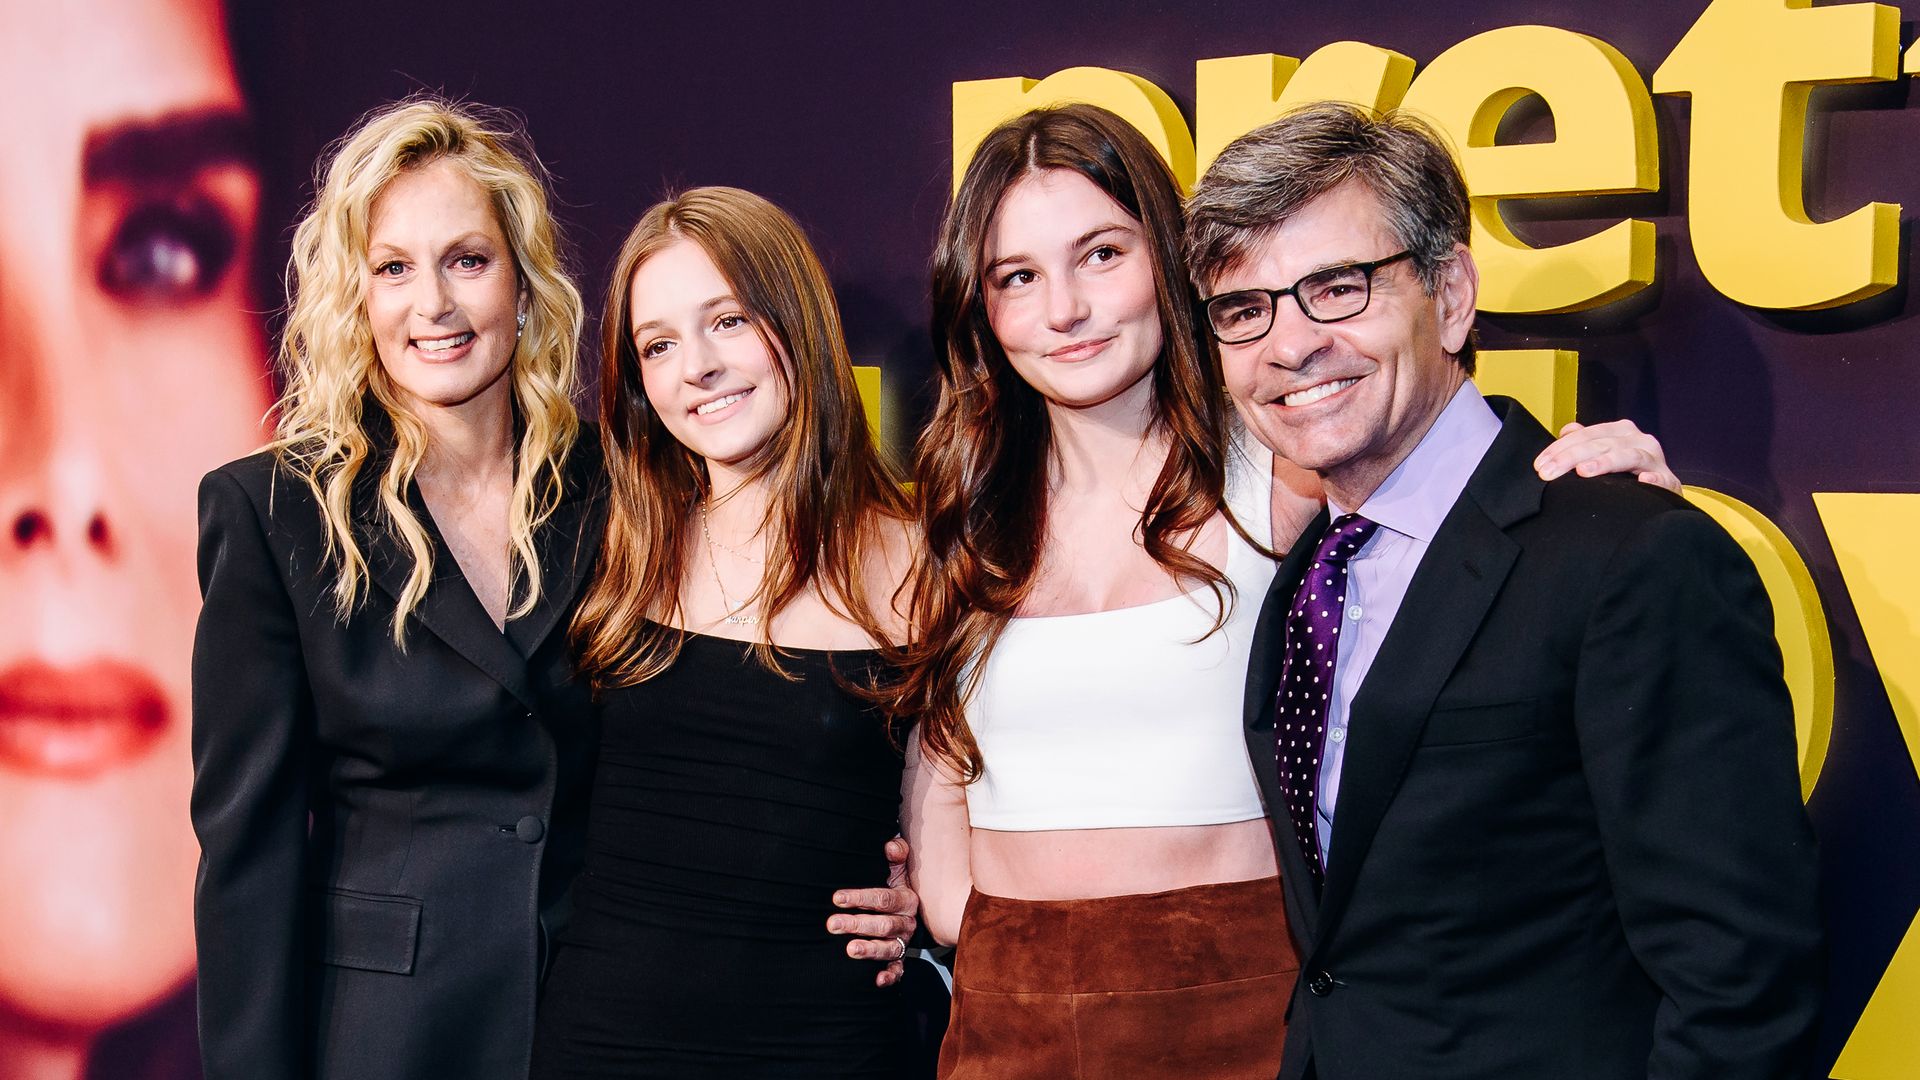 Ali Wentworth, Harper Andrea Stephanopoulos, Elliott Anastasia Stephanopoulos and George Stephanopoulos at the New York premiere of "Pretty Baby: Brooke Shields" held at Alice Tully Hall on March 29, 2023 in New York City